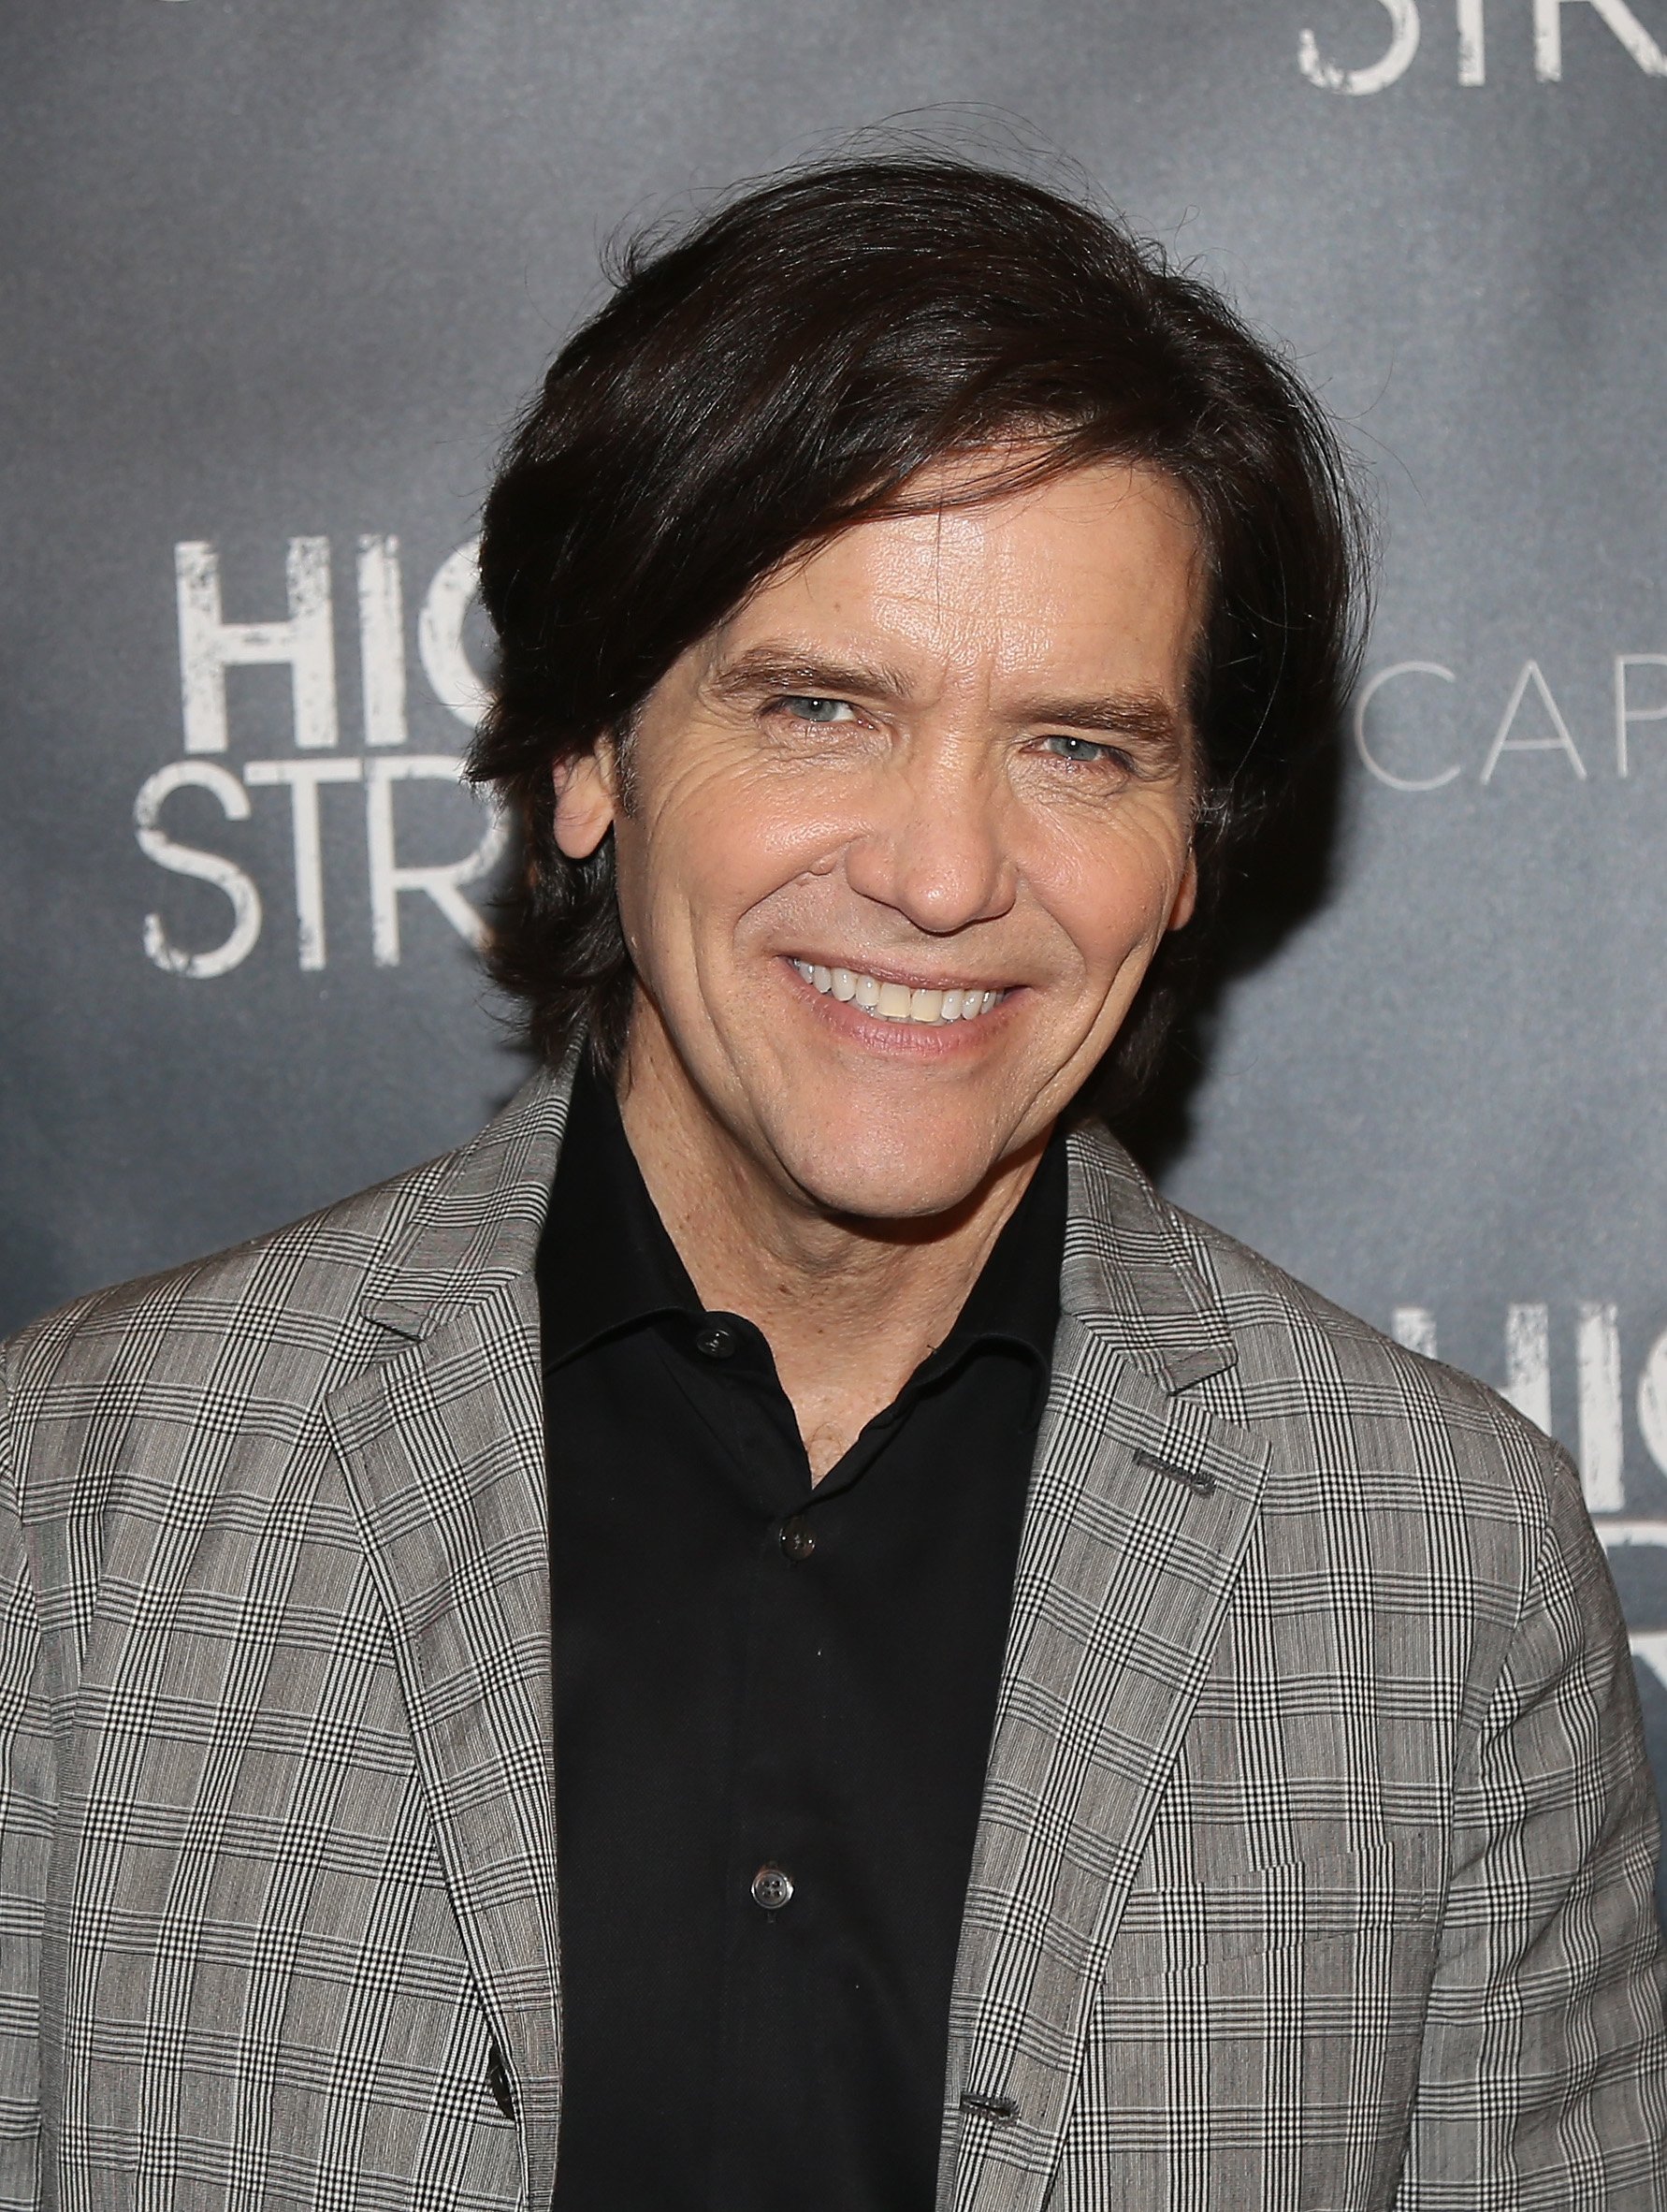 'The Young and the Restless' star Michael Damian wearing a grey suit and black shirt.